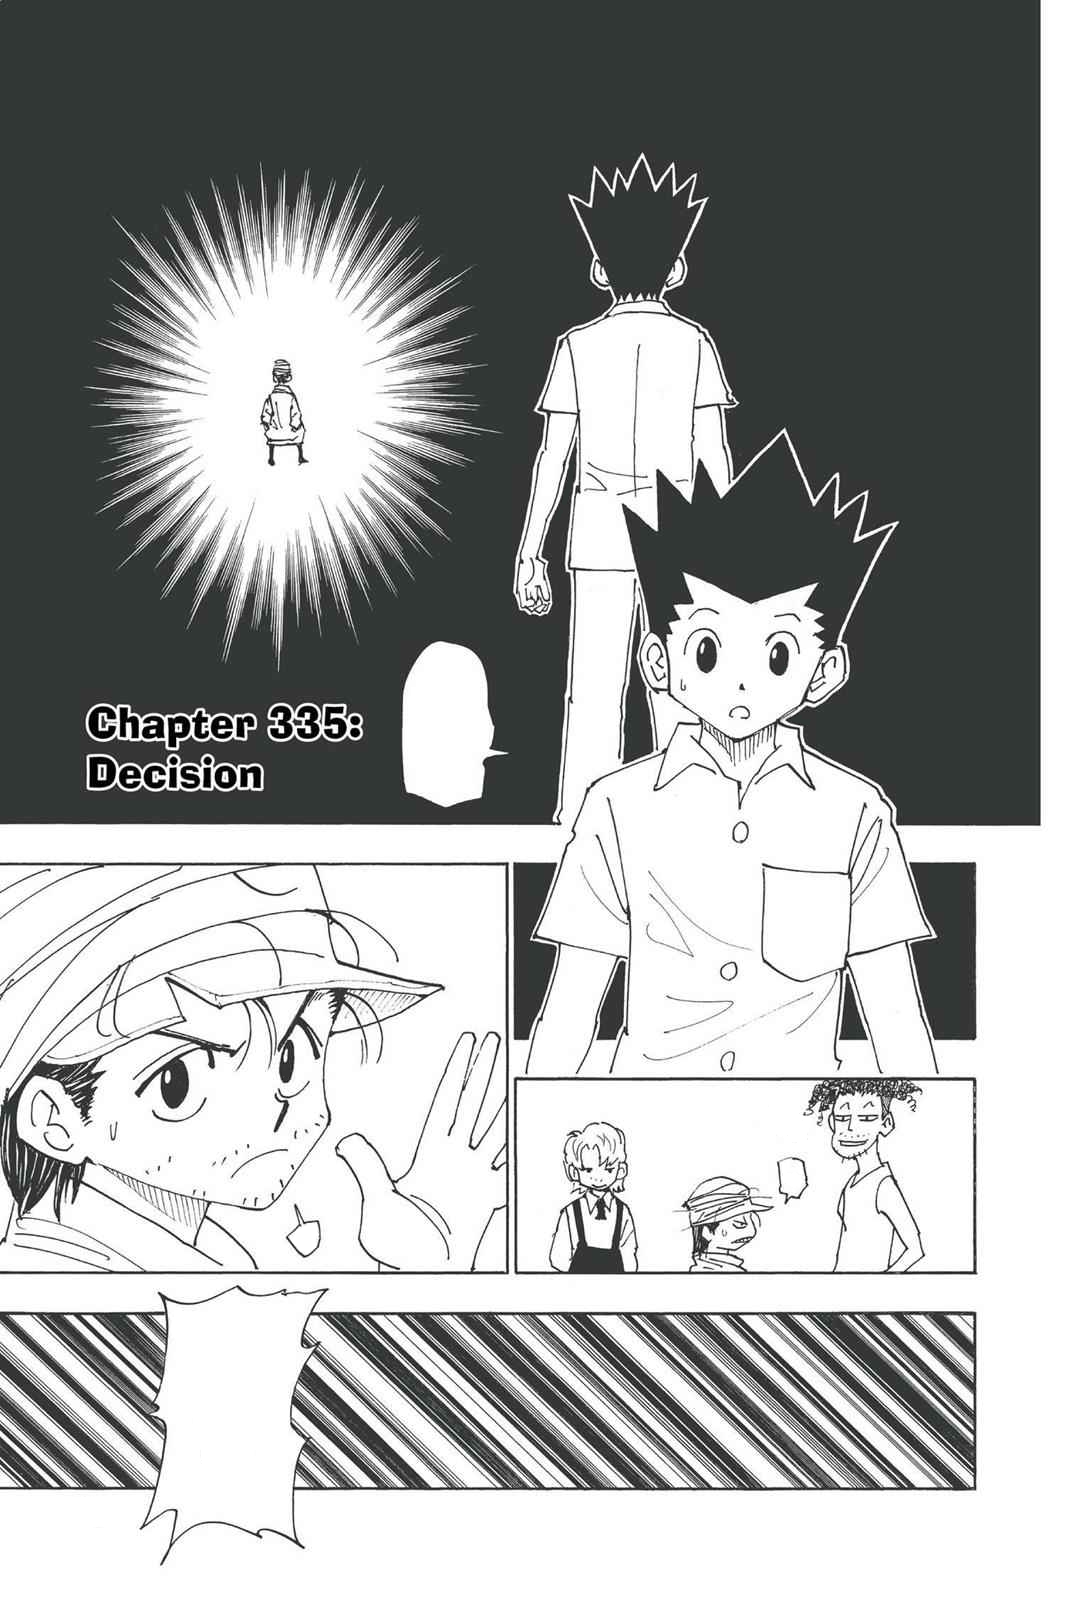 Does Gon ever meet his dad in Hunter x Hunter? - Quora